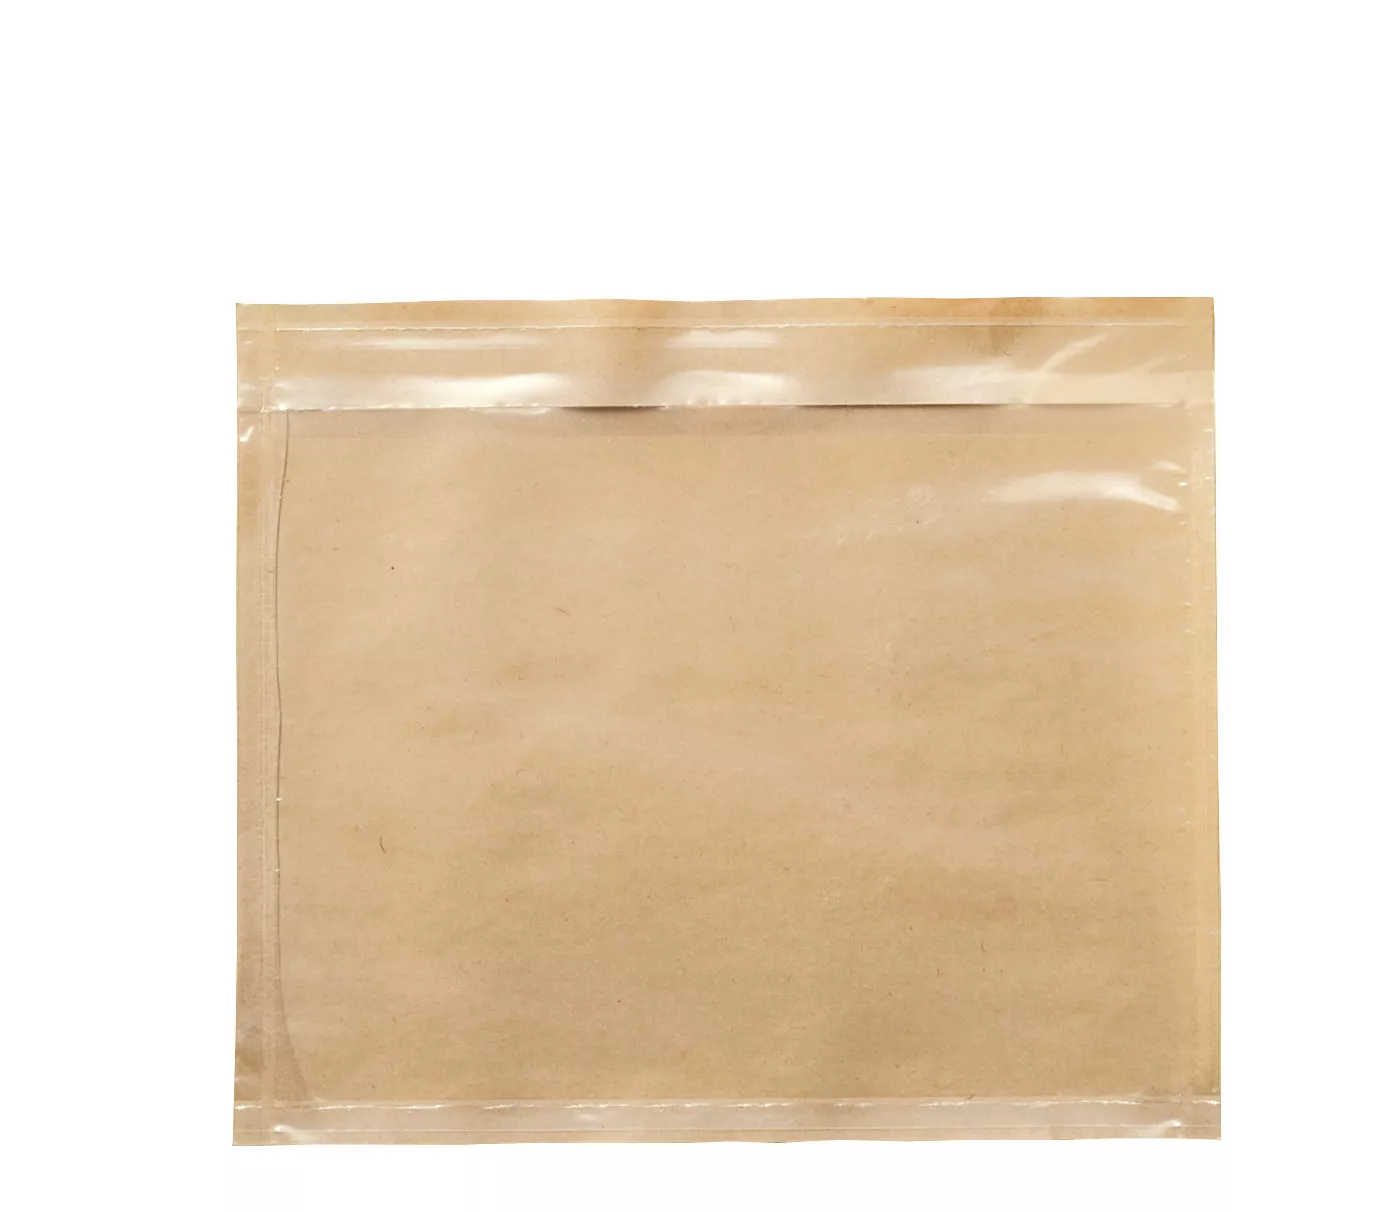 3M™ Non-Printed Packing List Envelope NP9, 7 in x 6 in, 1000/Case